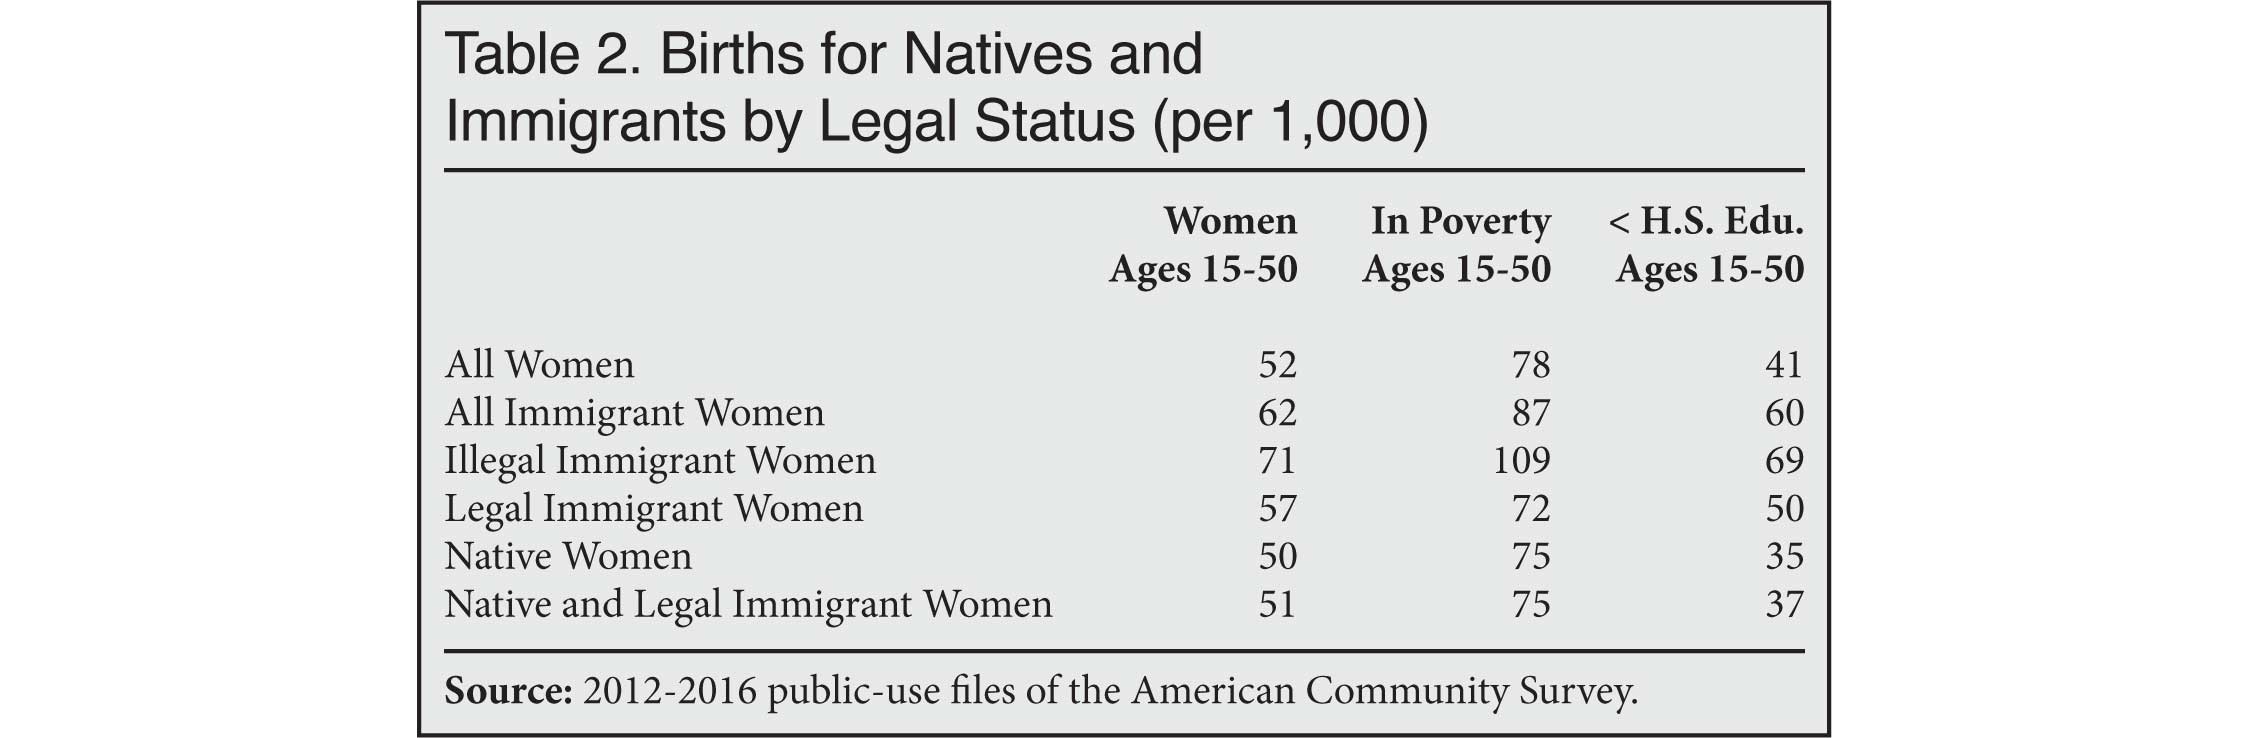 Table: Births for Natives and Immigrants by Legal Status